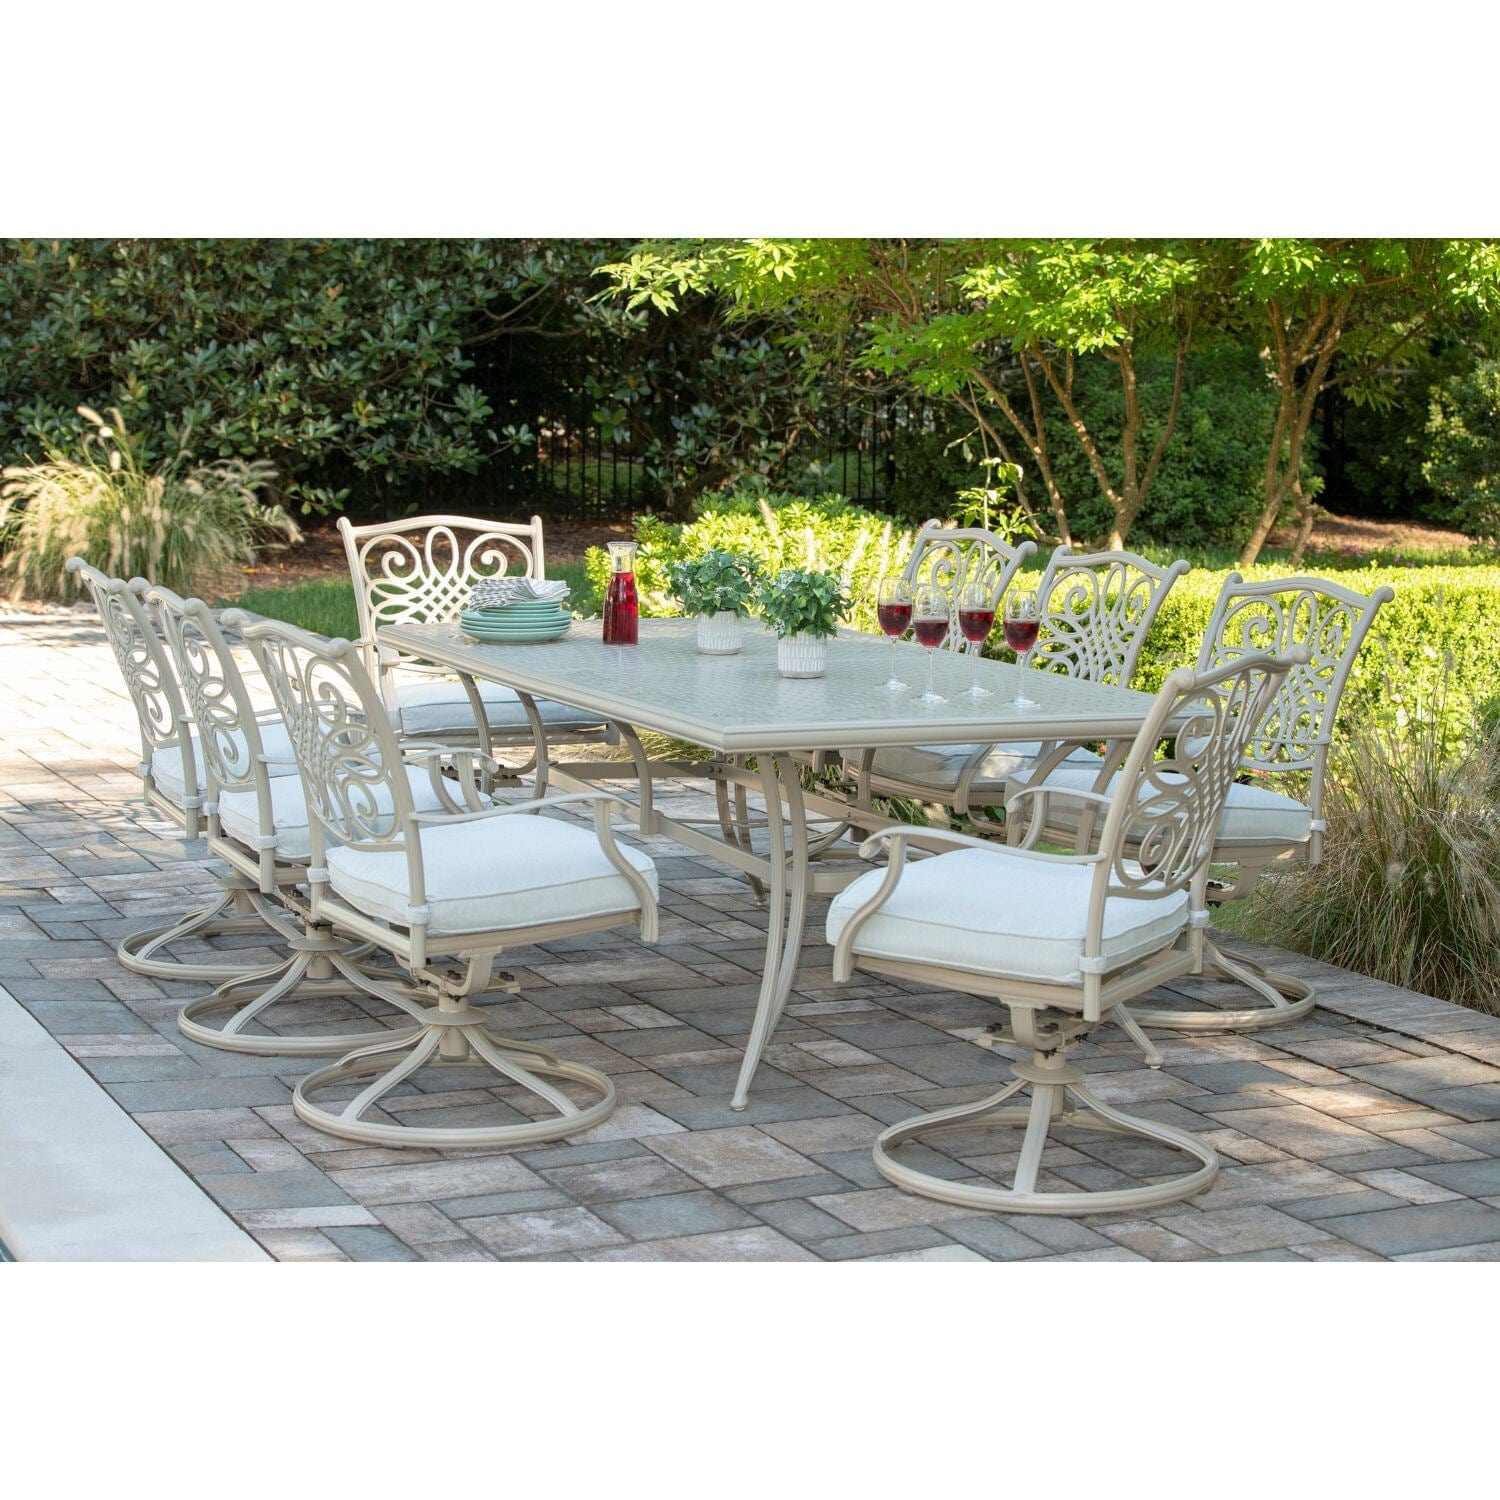 Hanover Outdoor Dining Set Hanover Traditions 9-Piece Aluminium Frame Dining Set with 8 Swivel Rockers, Large 84-in. x 42-in. Cast-top Table, 11-Ft. Table - TRADDNSD9PCSW8-BE